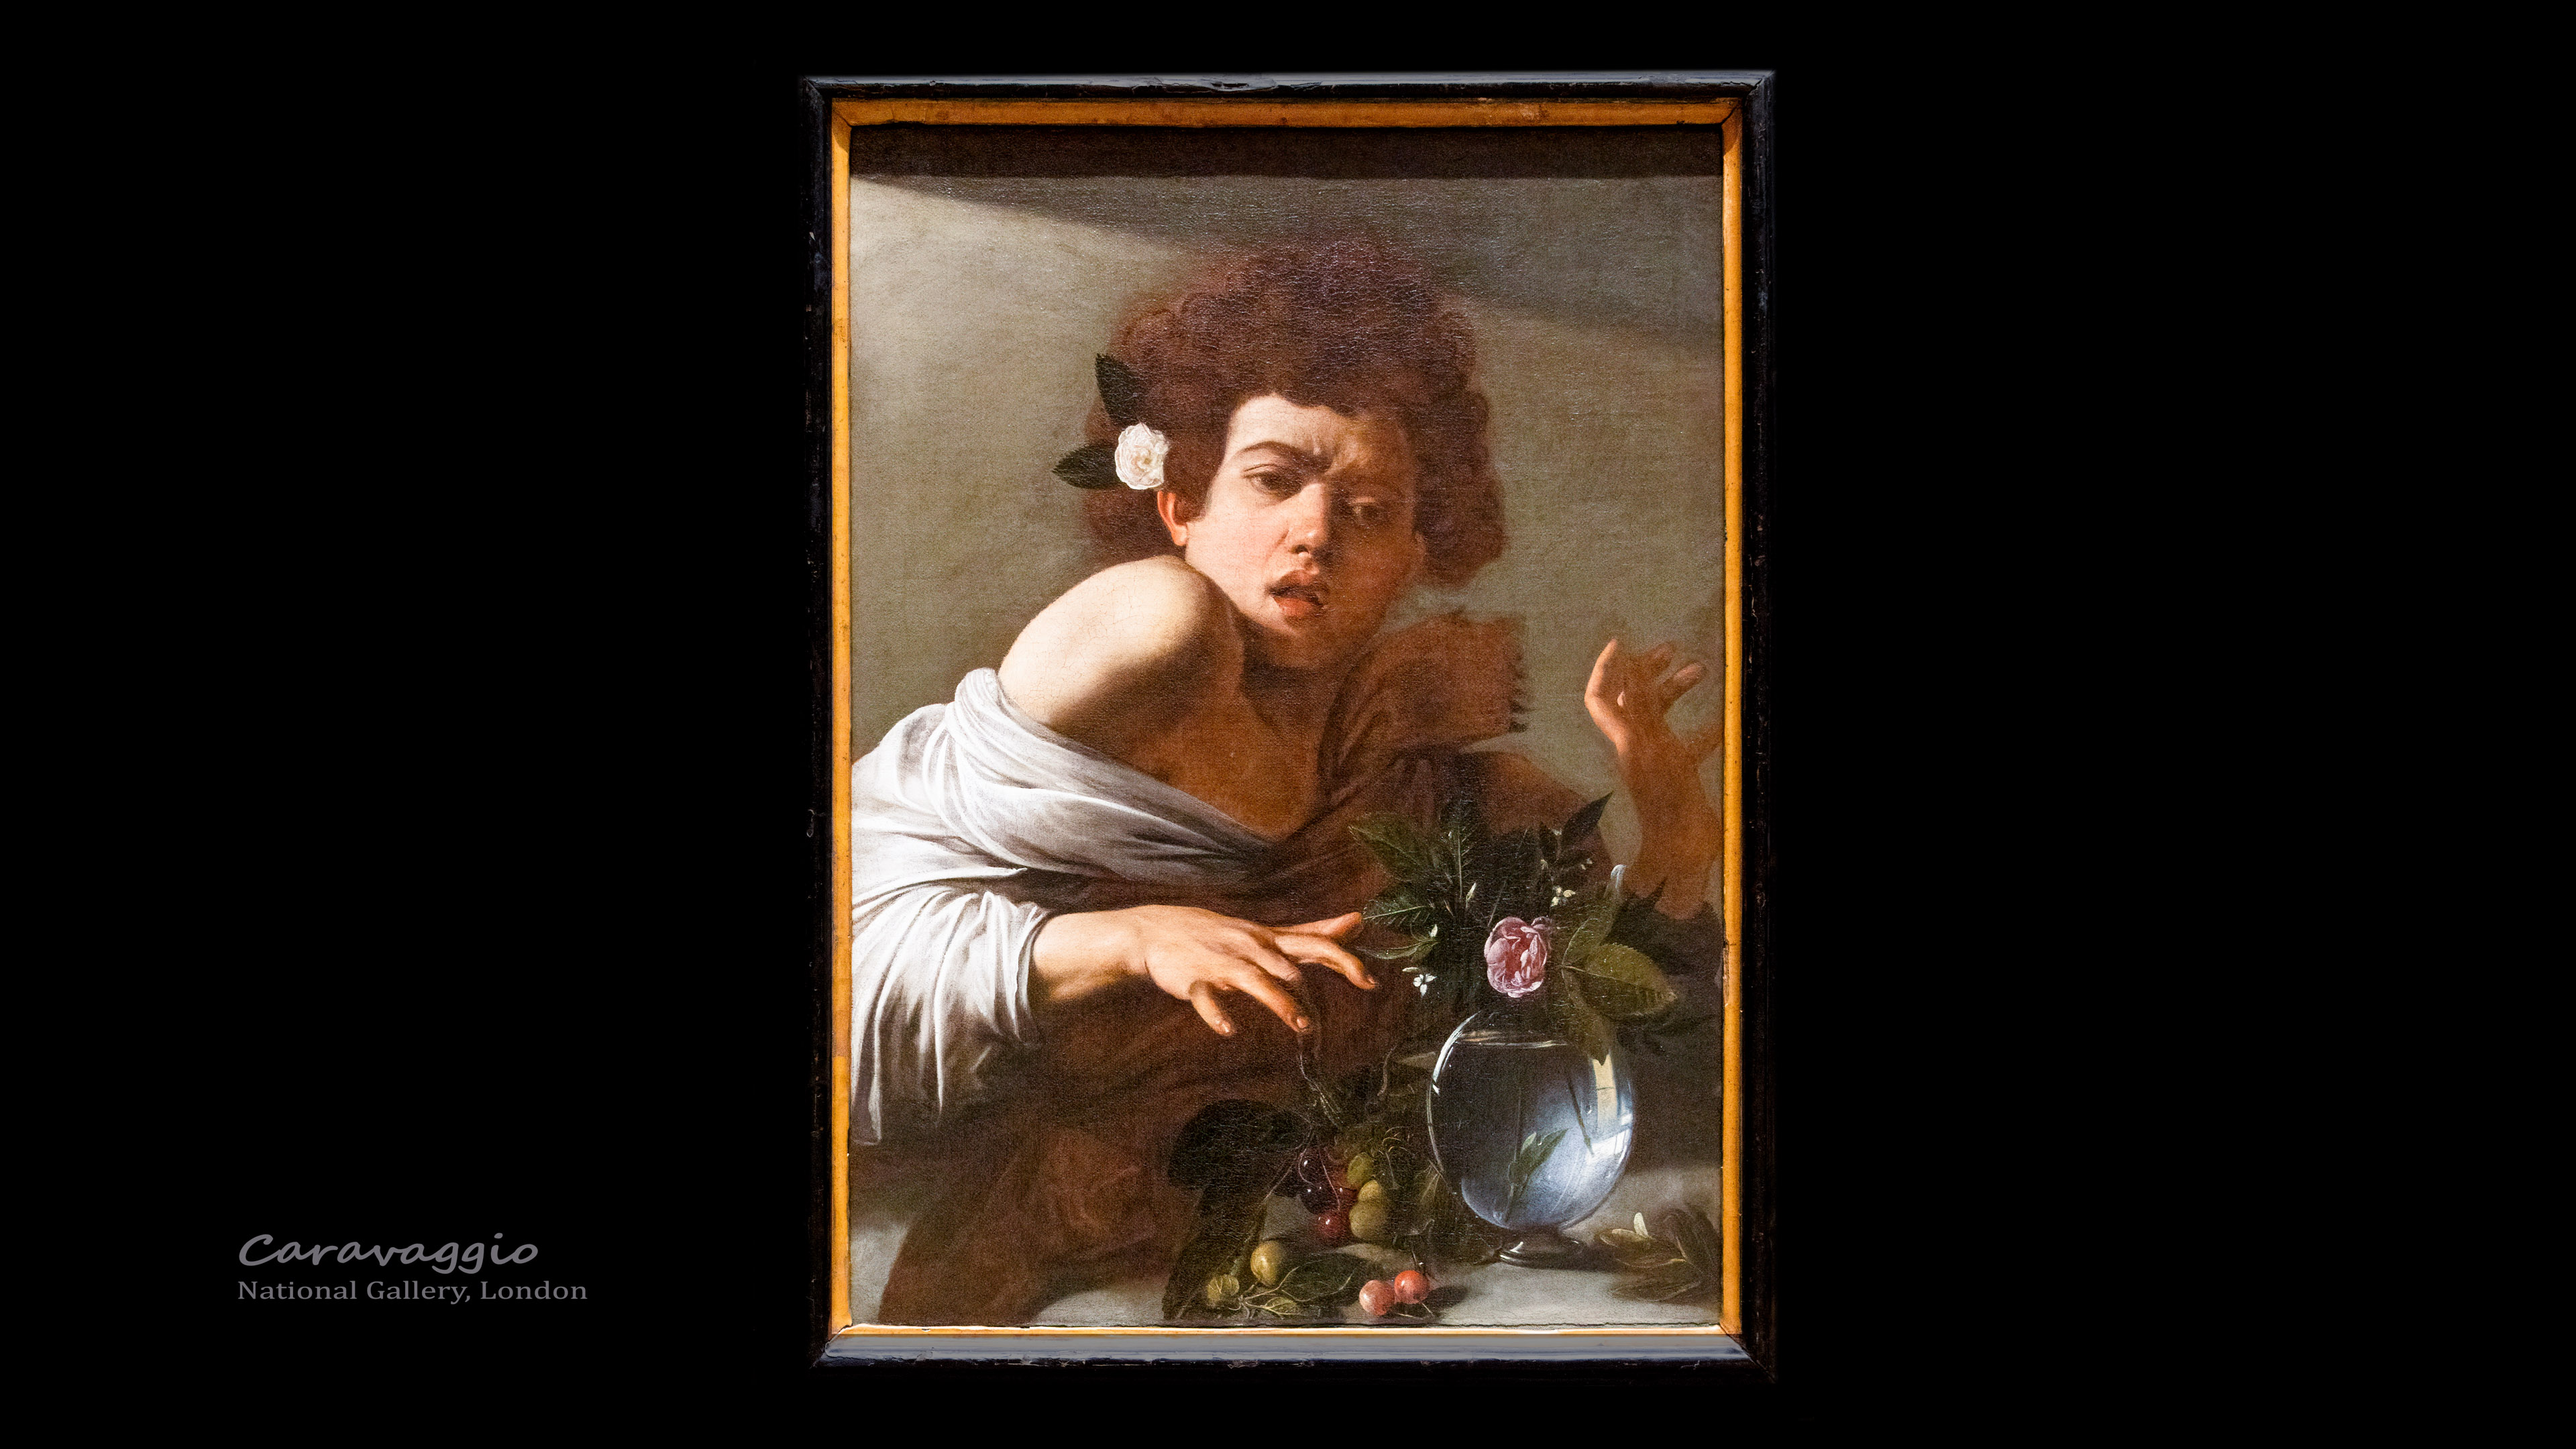 Immerse yourself in the rich details of Caravaggio's masterpiece painting with our 4K wallpaper.